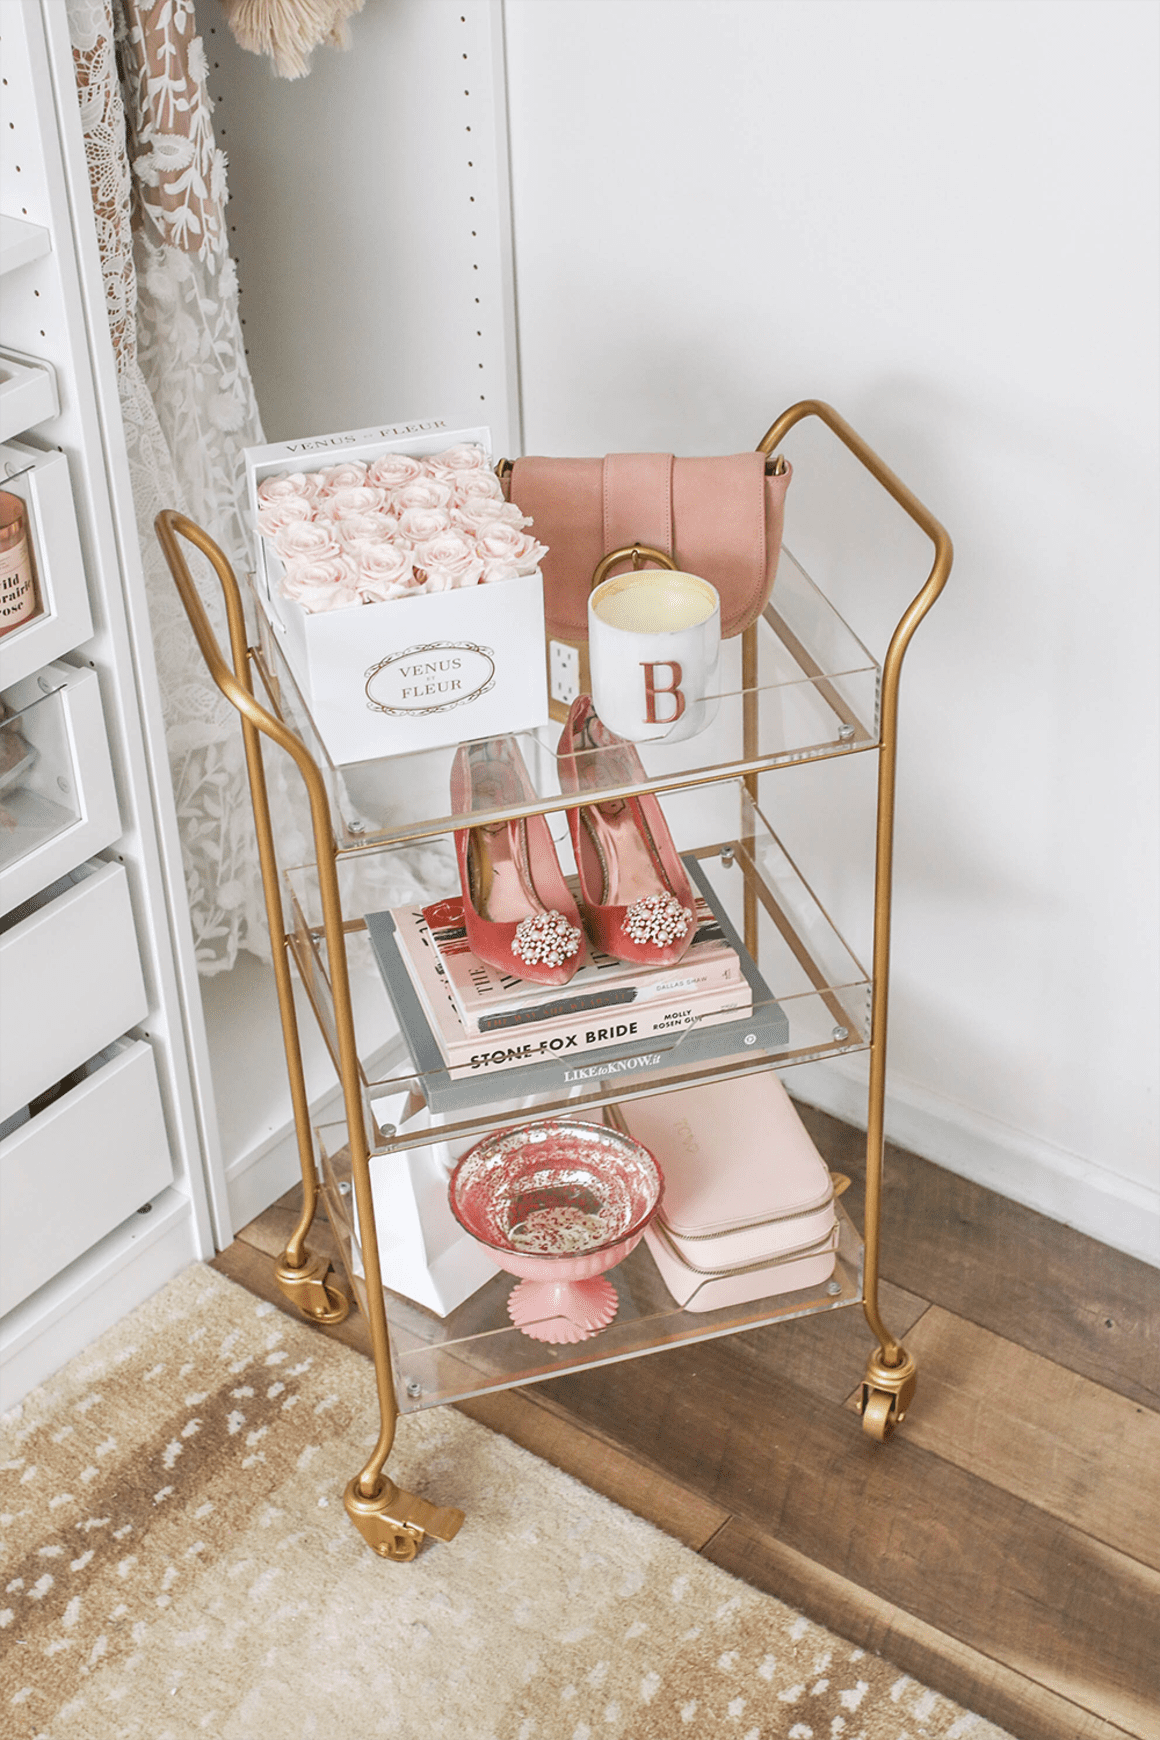 7 Surprising Uses For Bar Carts That Don't Involve Alcohol -   beauty Bar cart